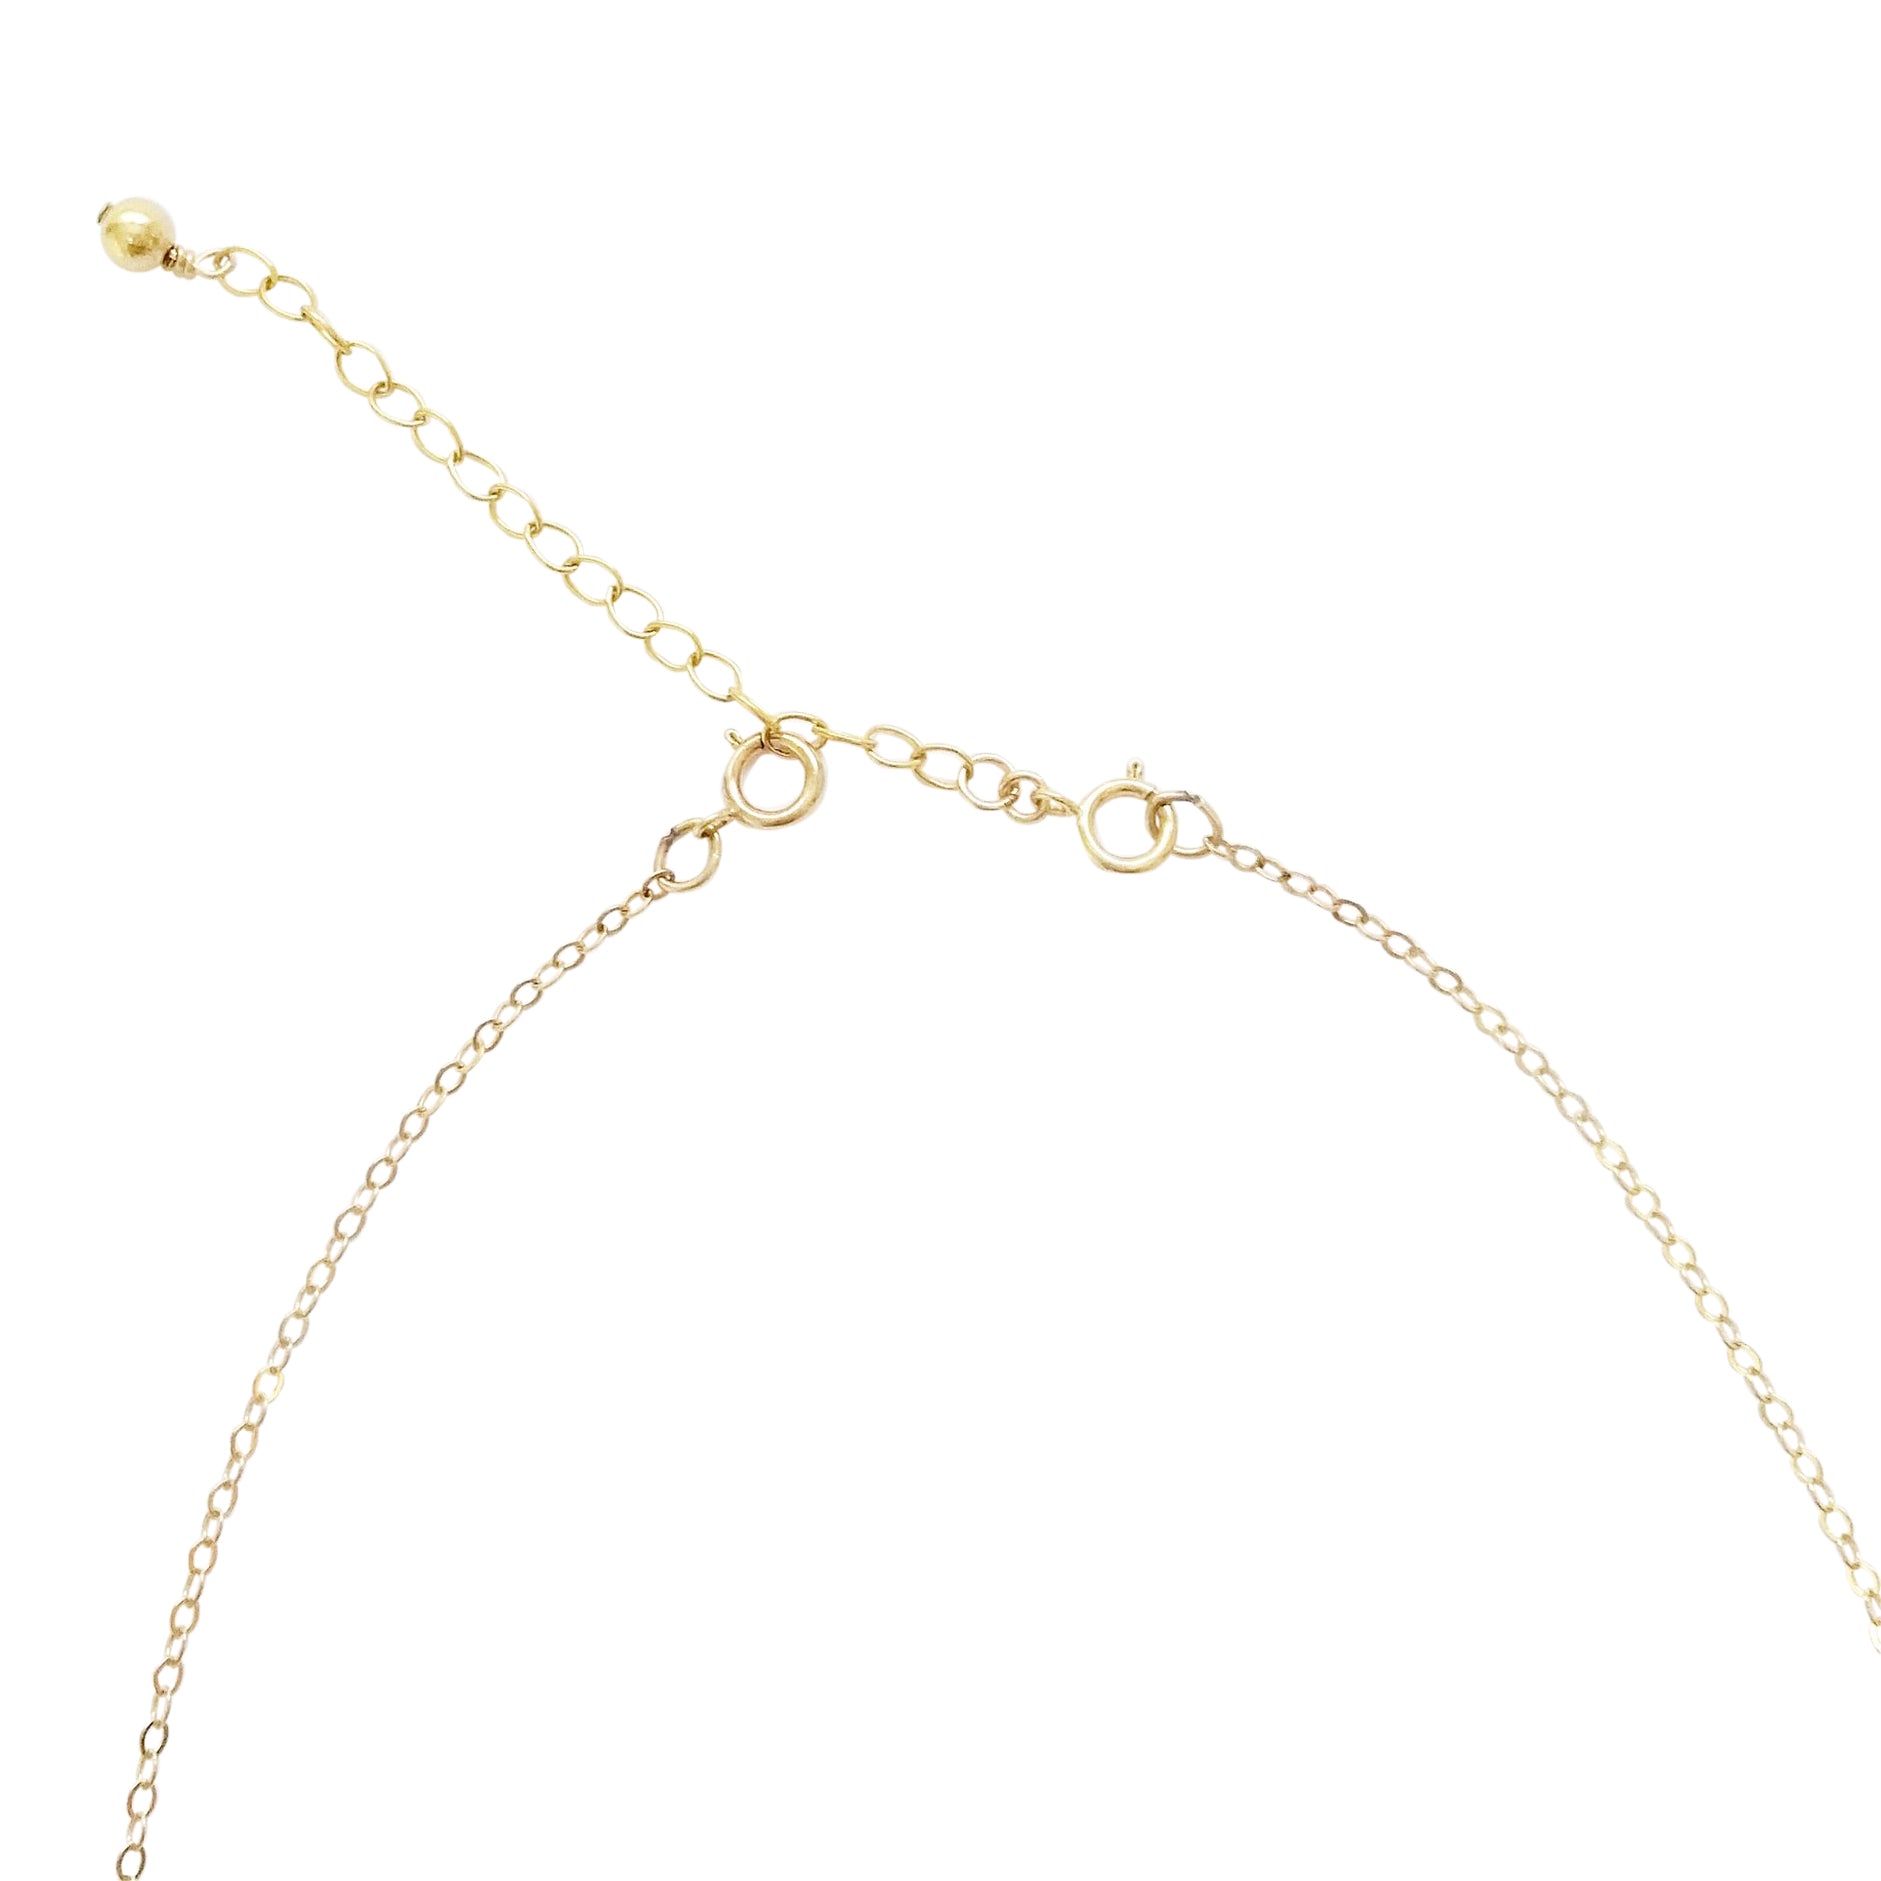 Lat & Lo chain extender for 2 inches of adjustable length, 14K gold filled